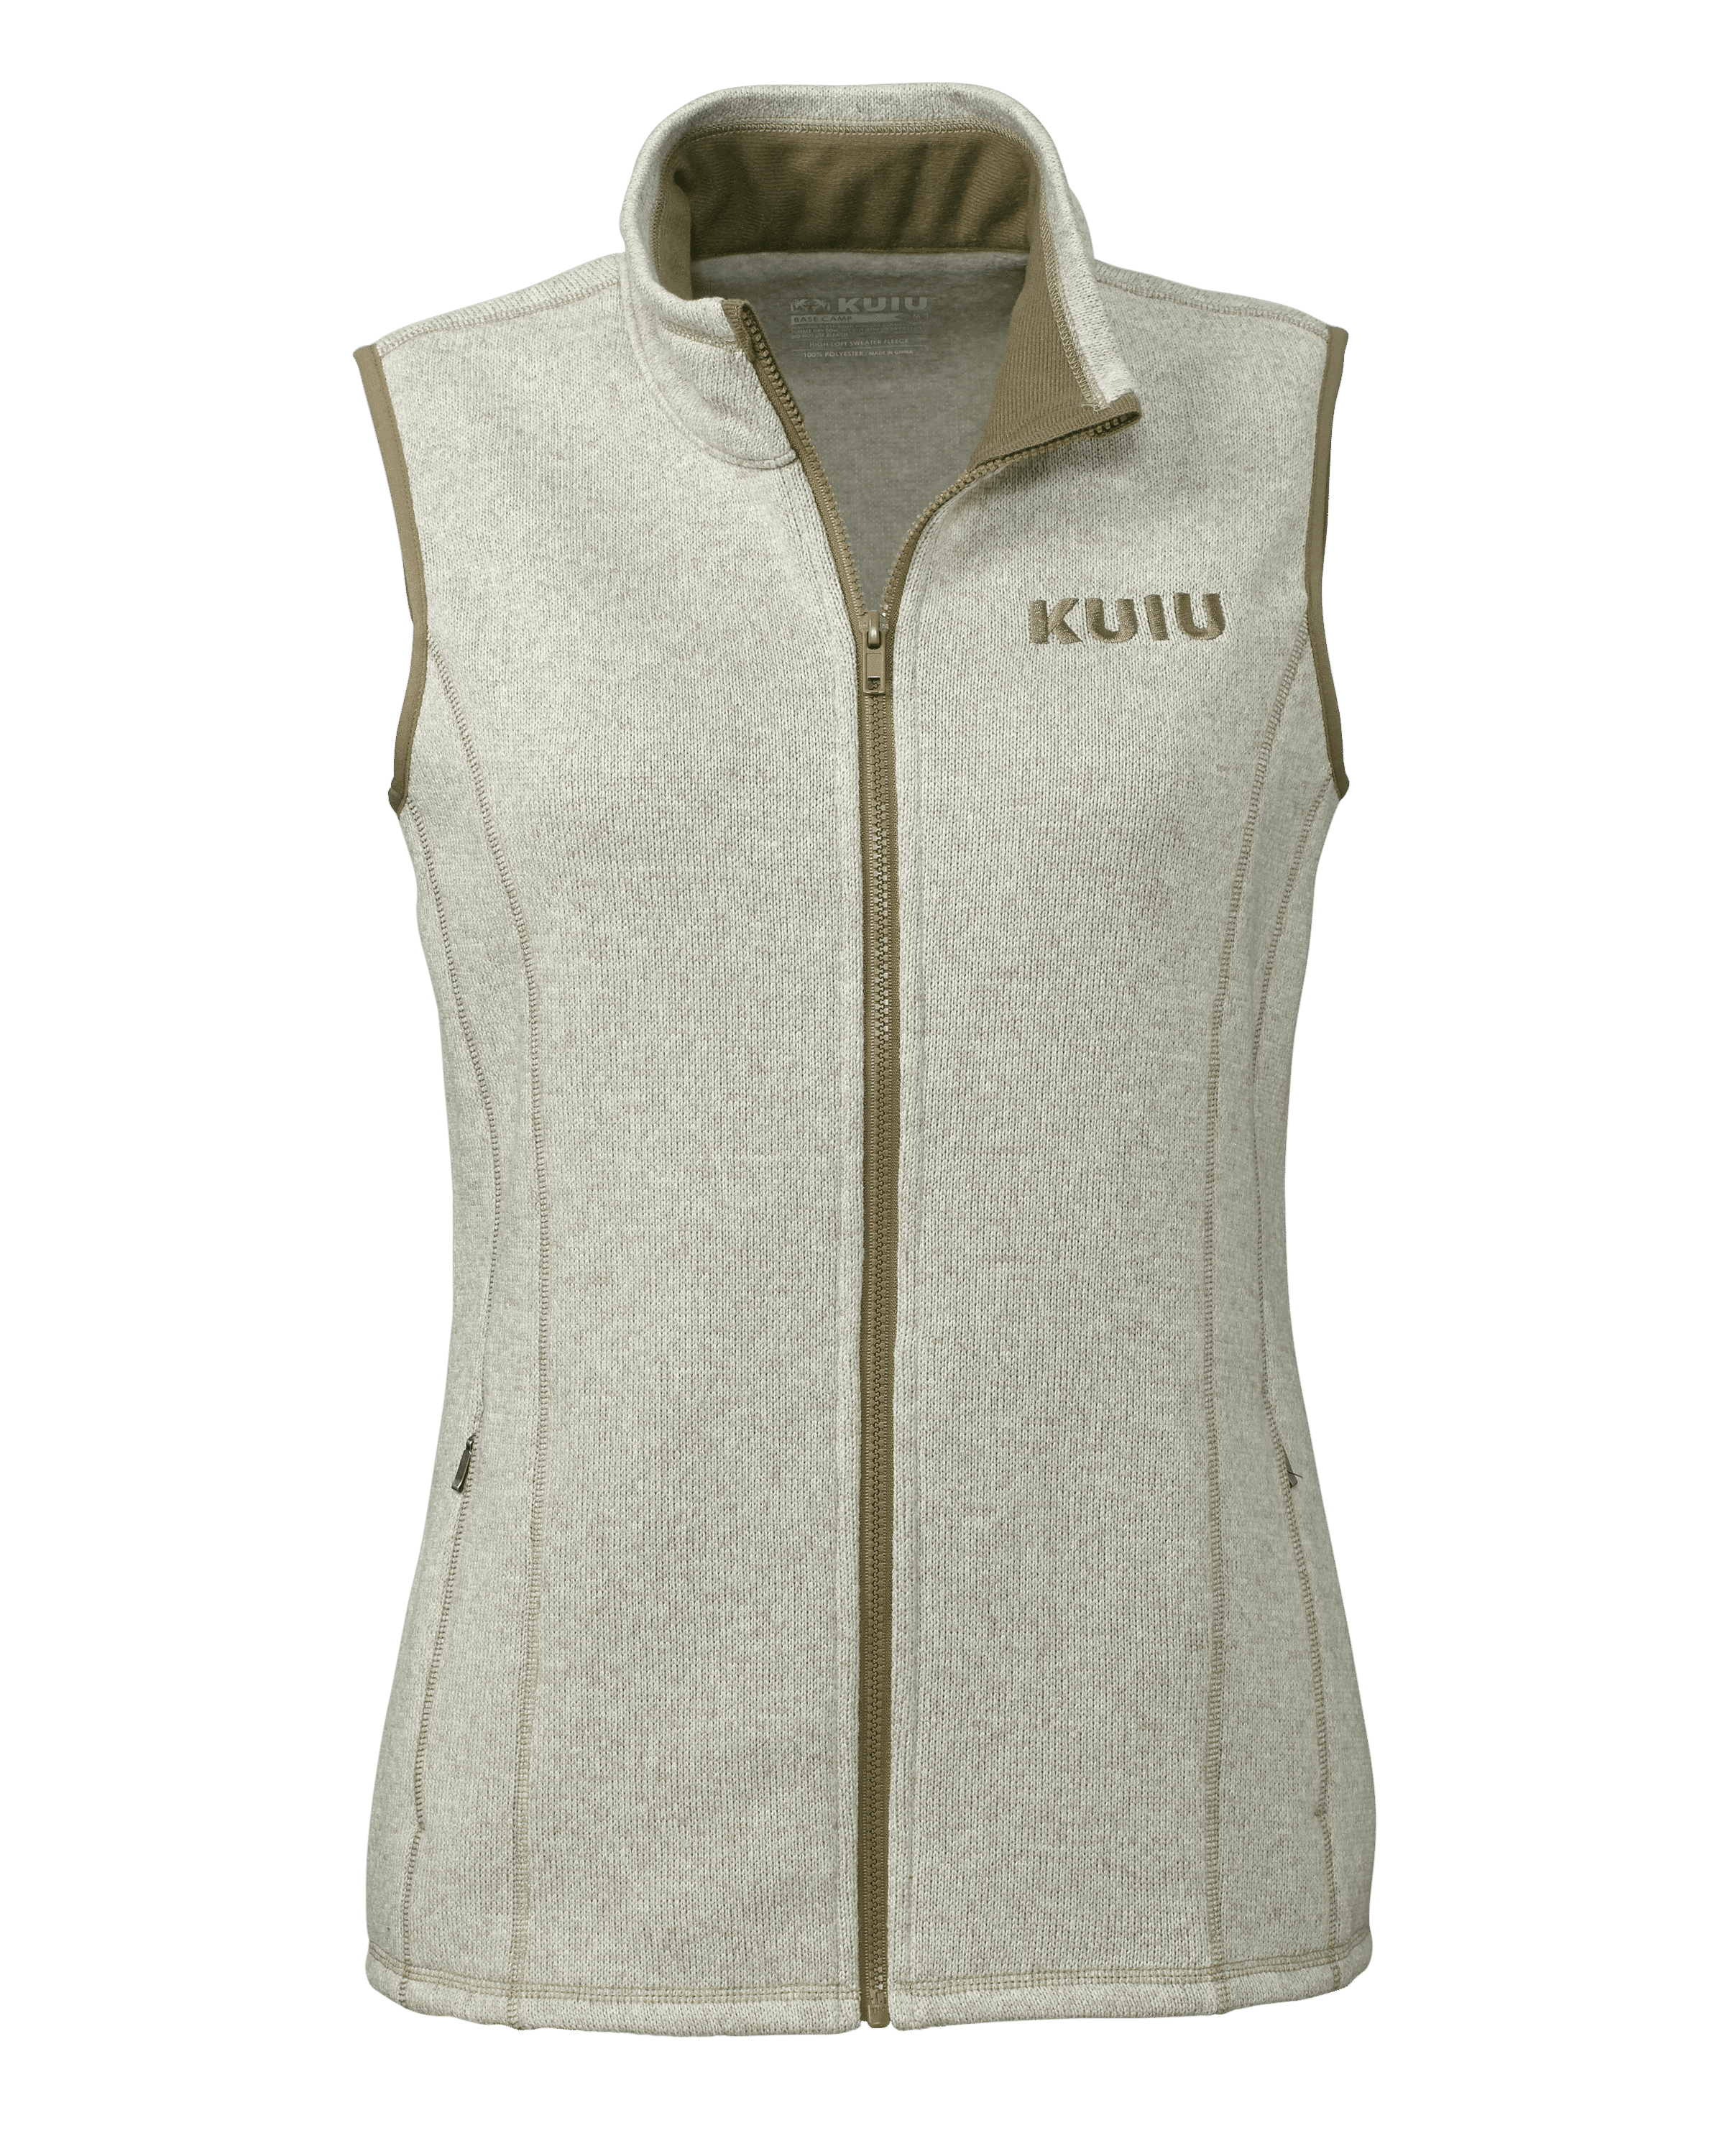 KUIU Outlet Women's Base Camp Sweater Vest in Oatmeal | Medium